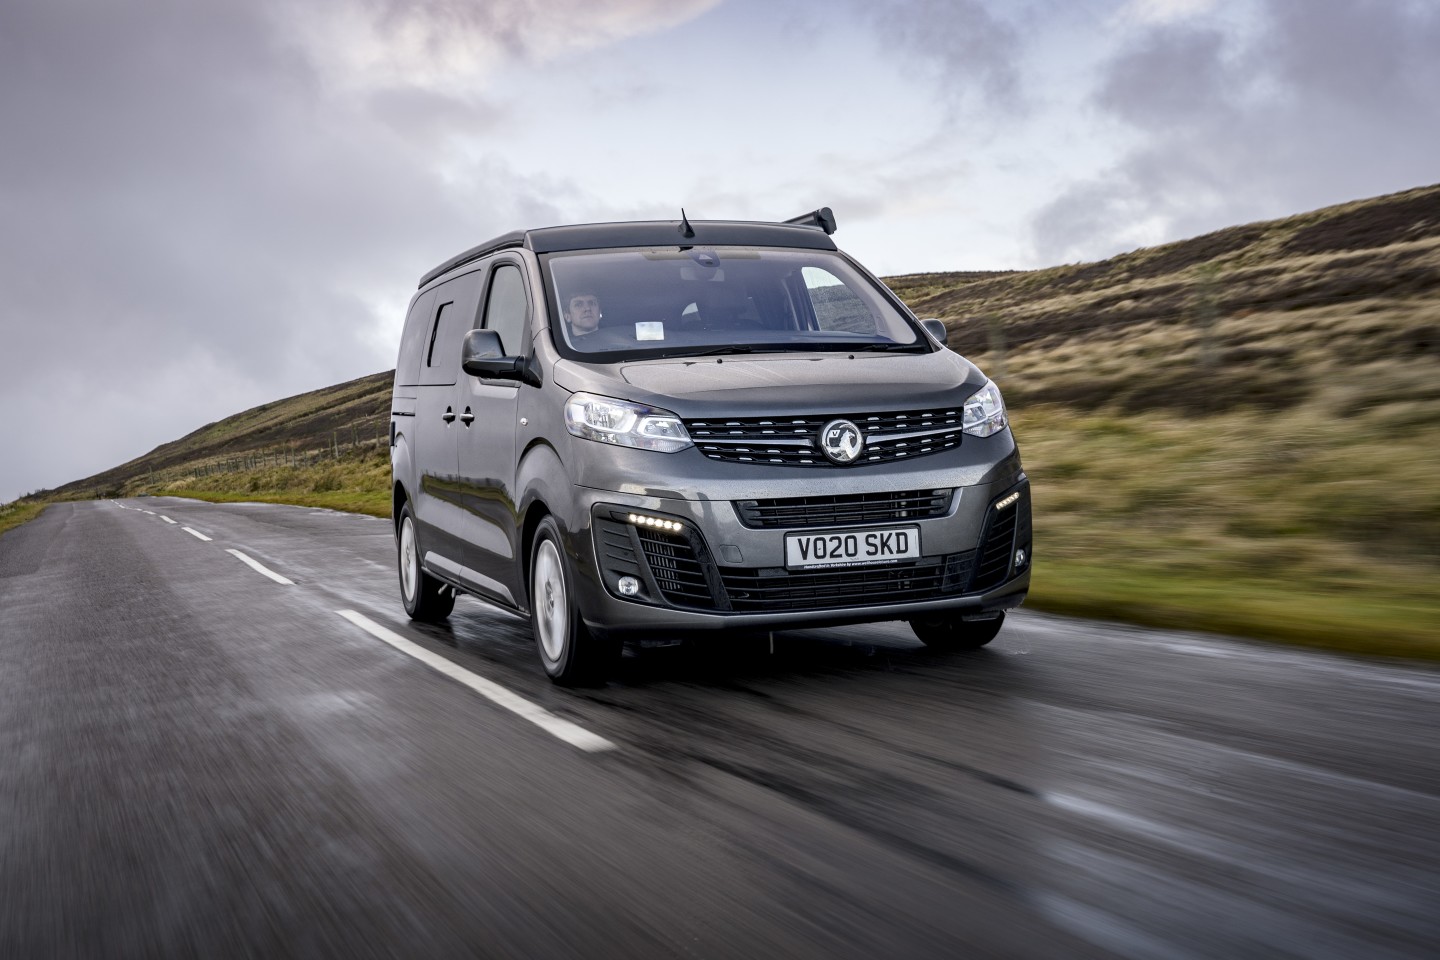 The Vauxhall Vivaro Elite Campervan will eventually be available with option of 2.0-liter diesel engine or electric drive